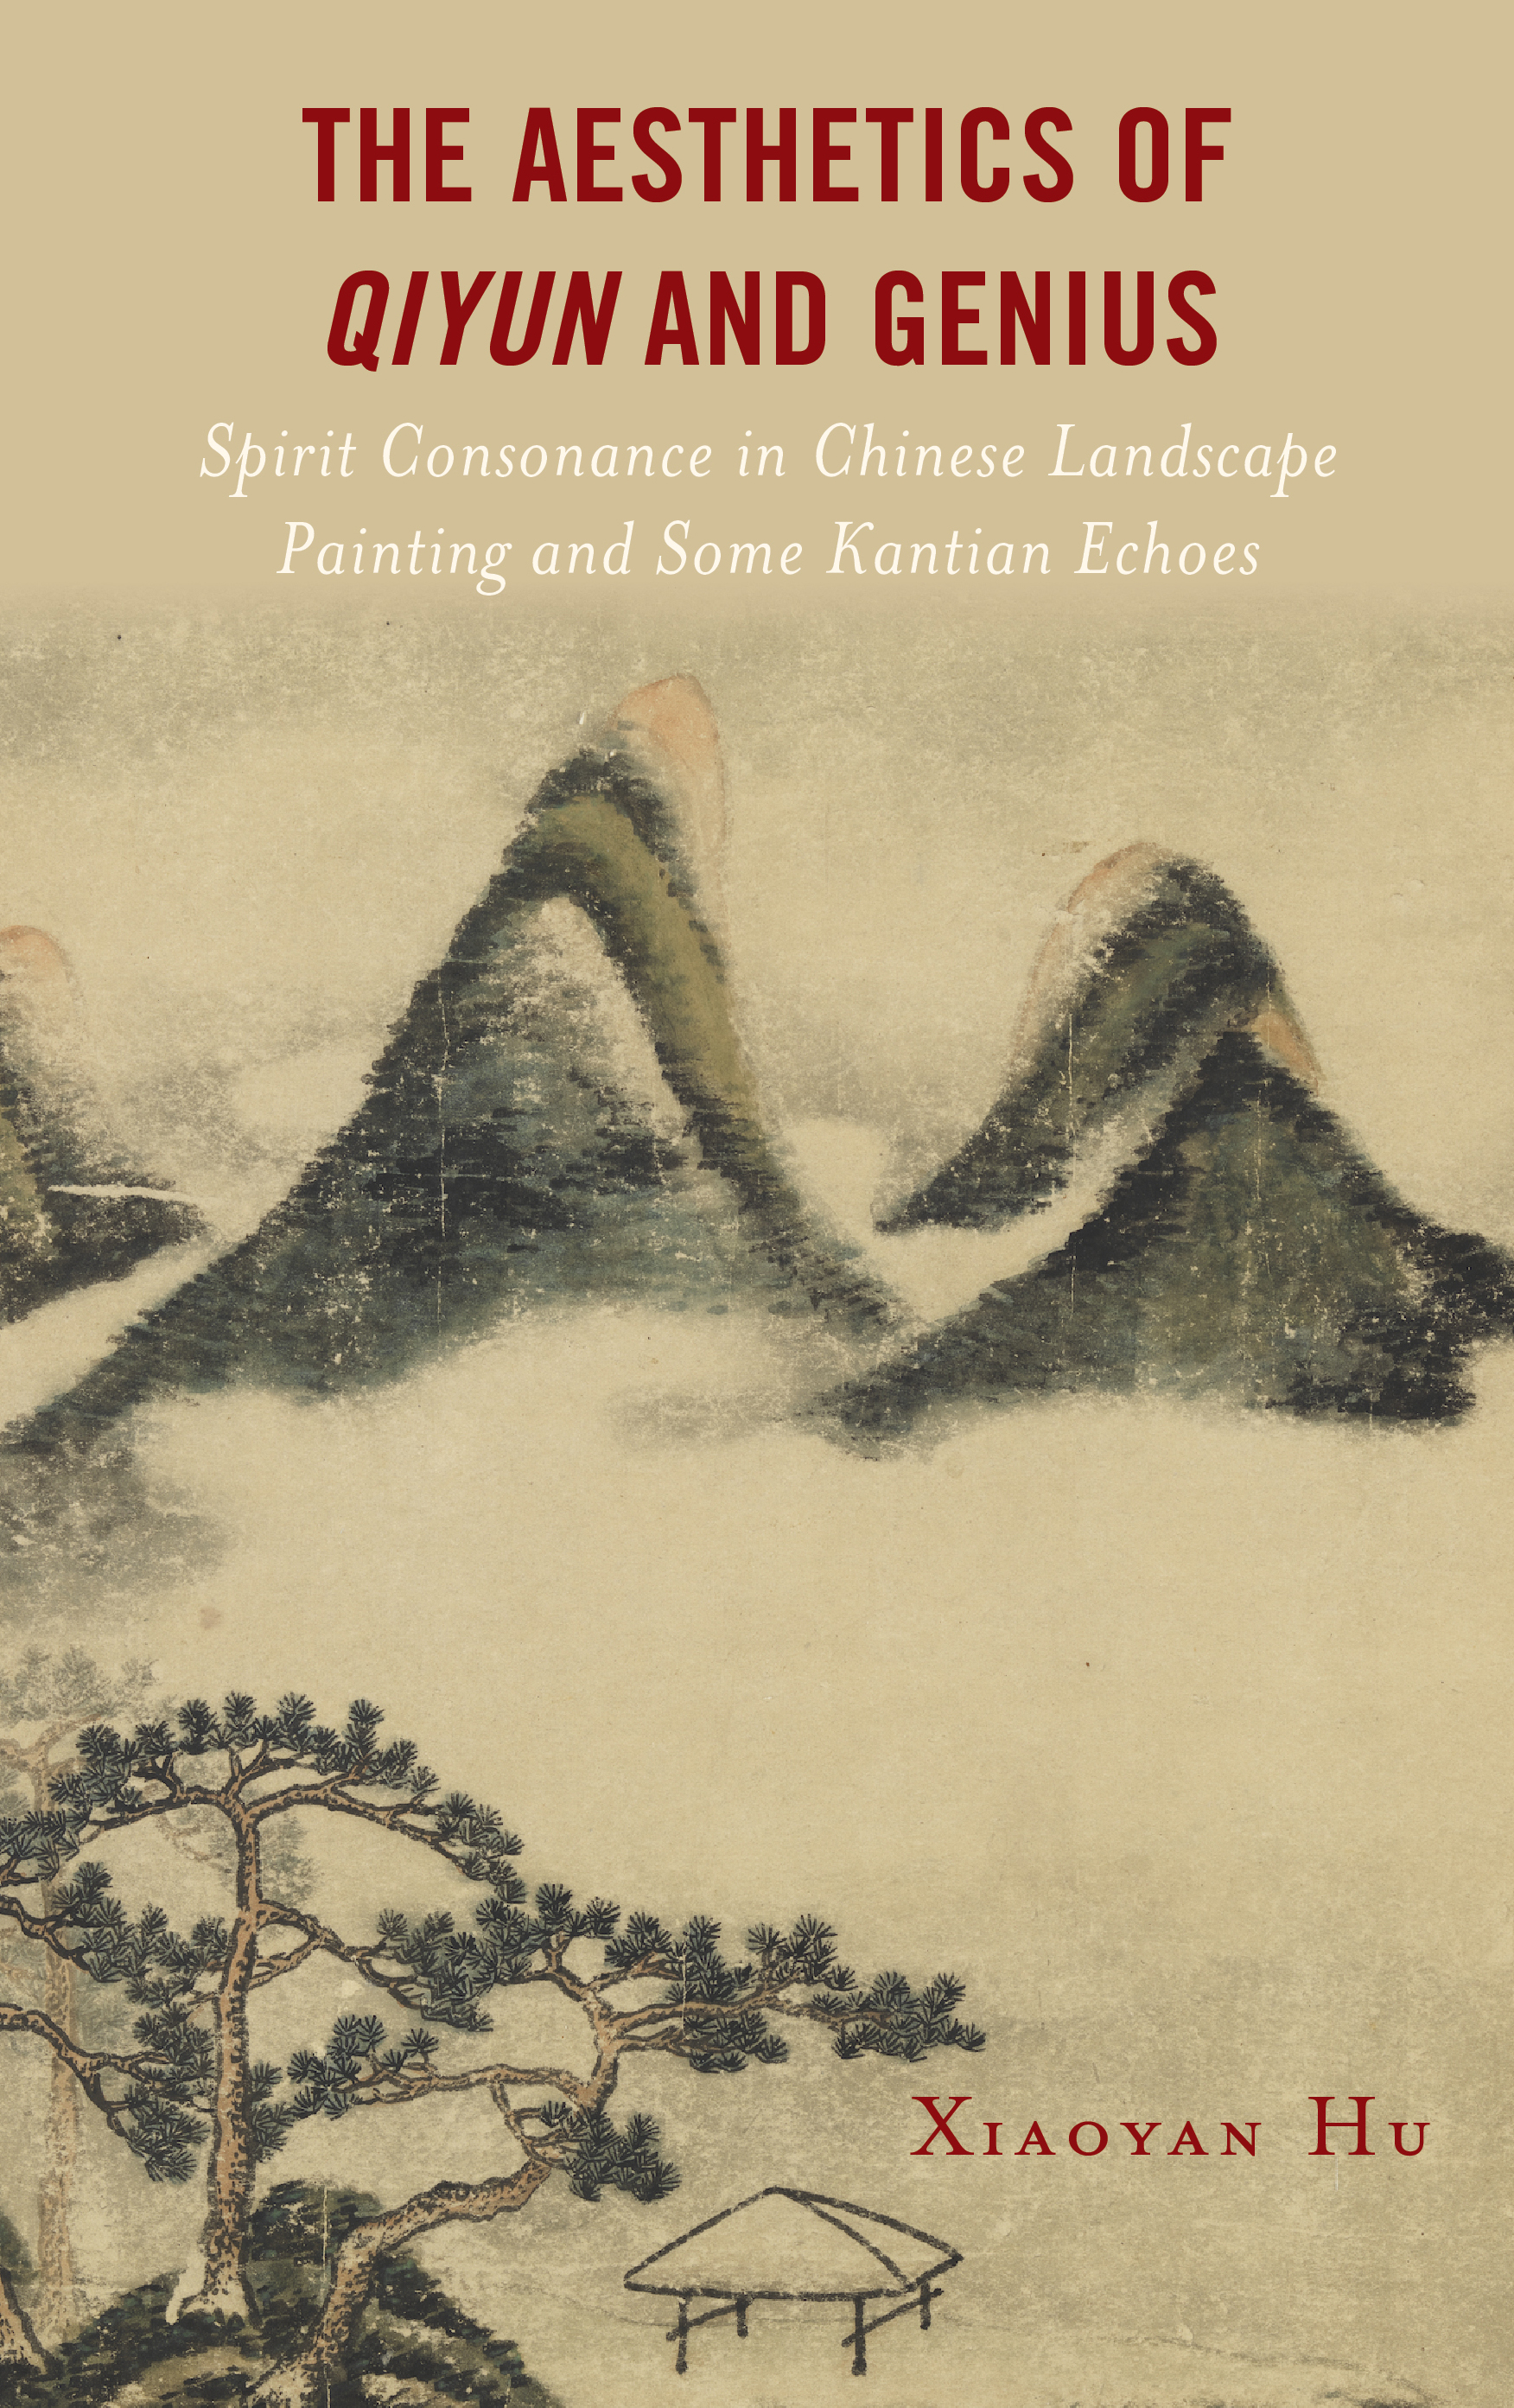 The Aesthetics of Qiyun and Genius: Spirit Consonance in Chinese Landscape Painting and Some Kantian Echoes